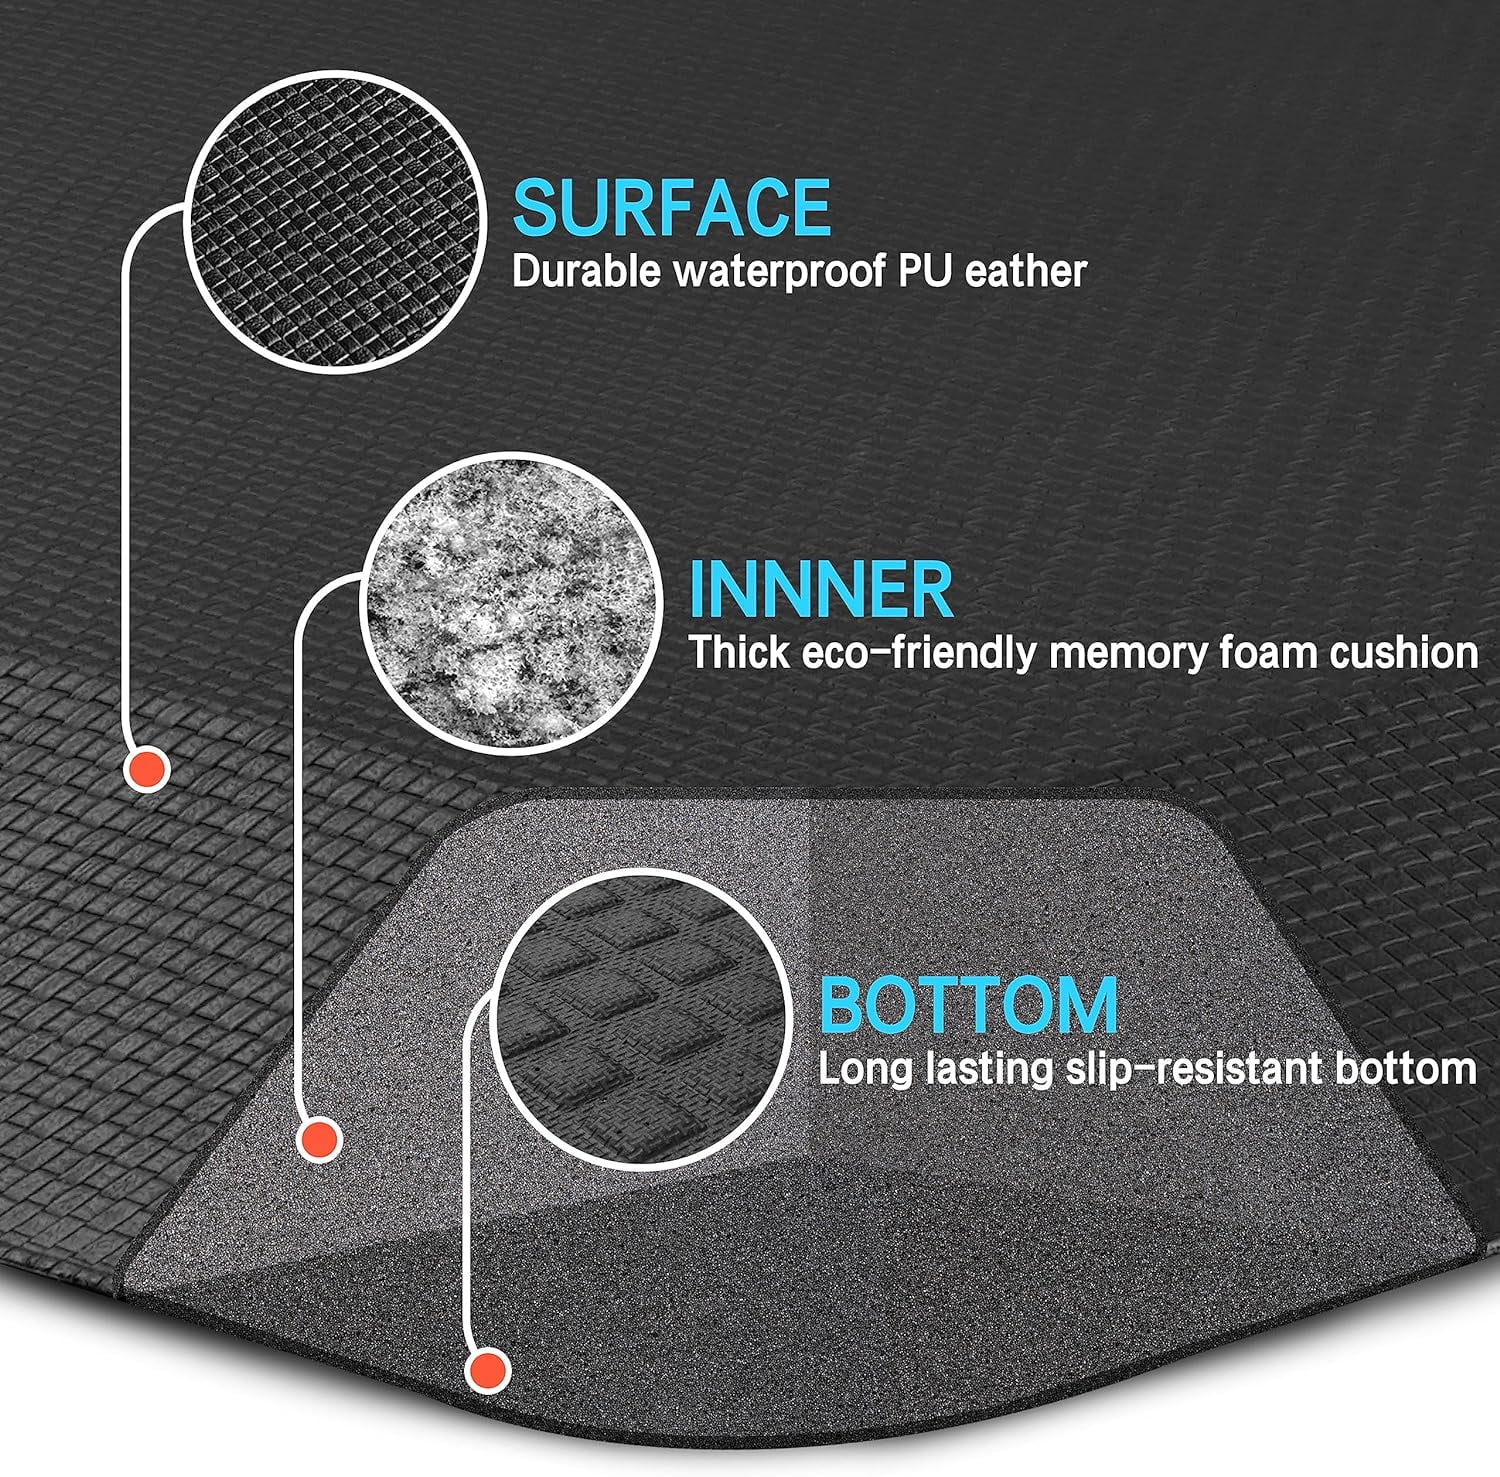 FEATOL Anti Fatigue Mat Kitchen Mats Cushioned,Thicken Core Foam for Kitchens,Standing